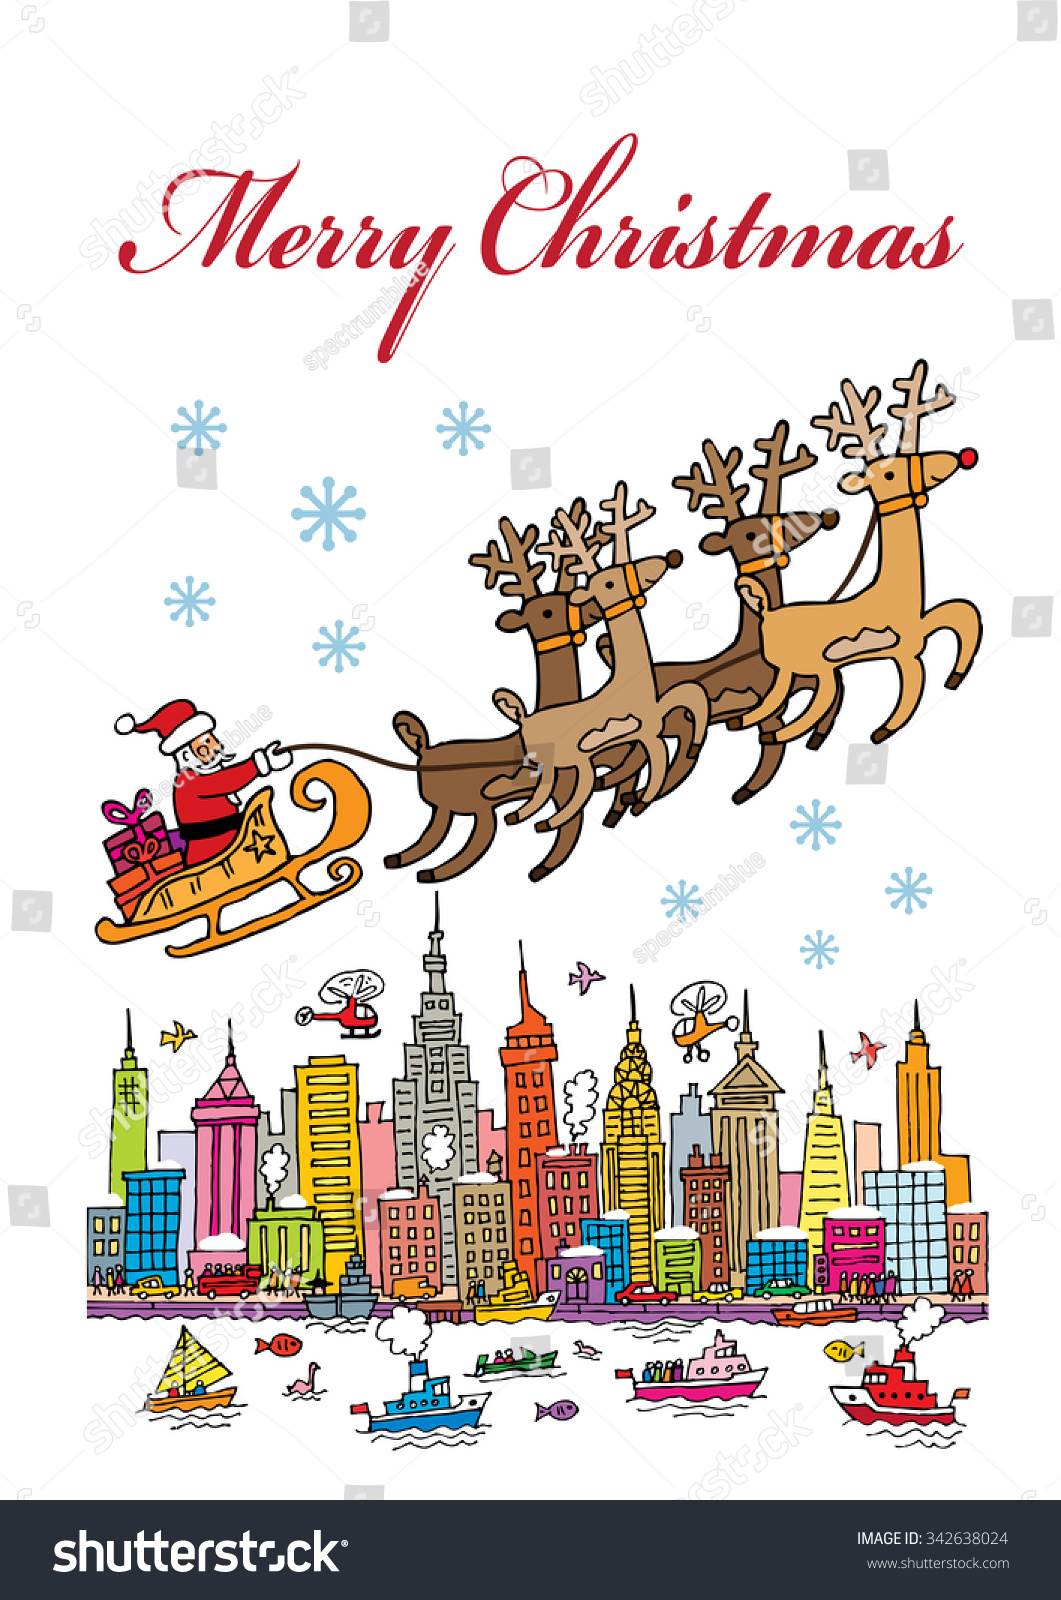 A cartoon style vector of Santa flying over the city of New York